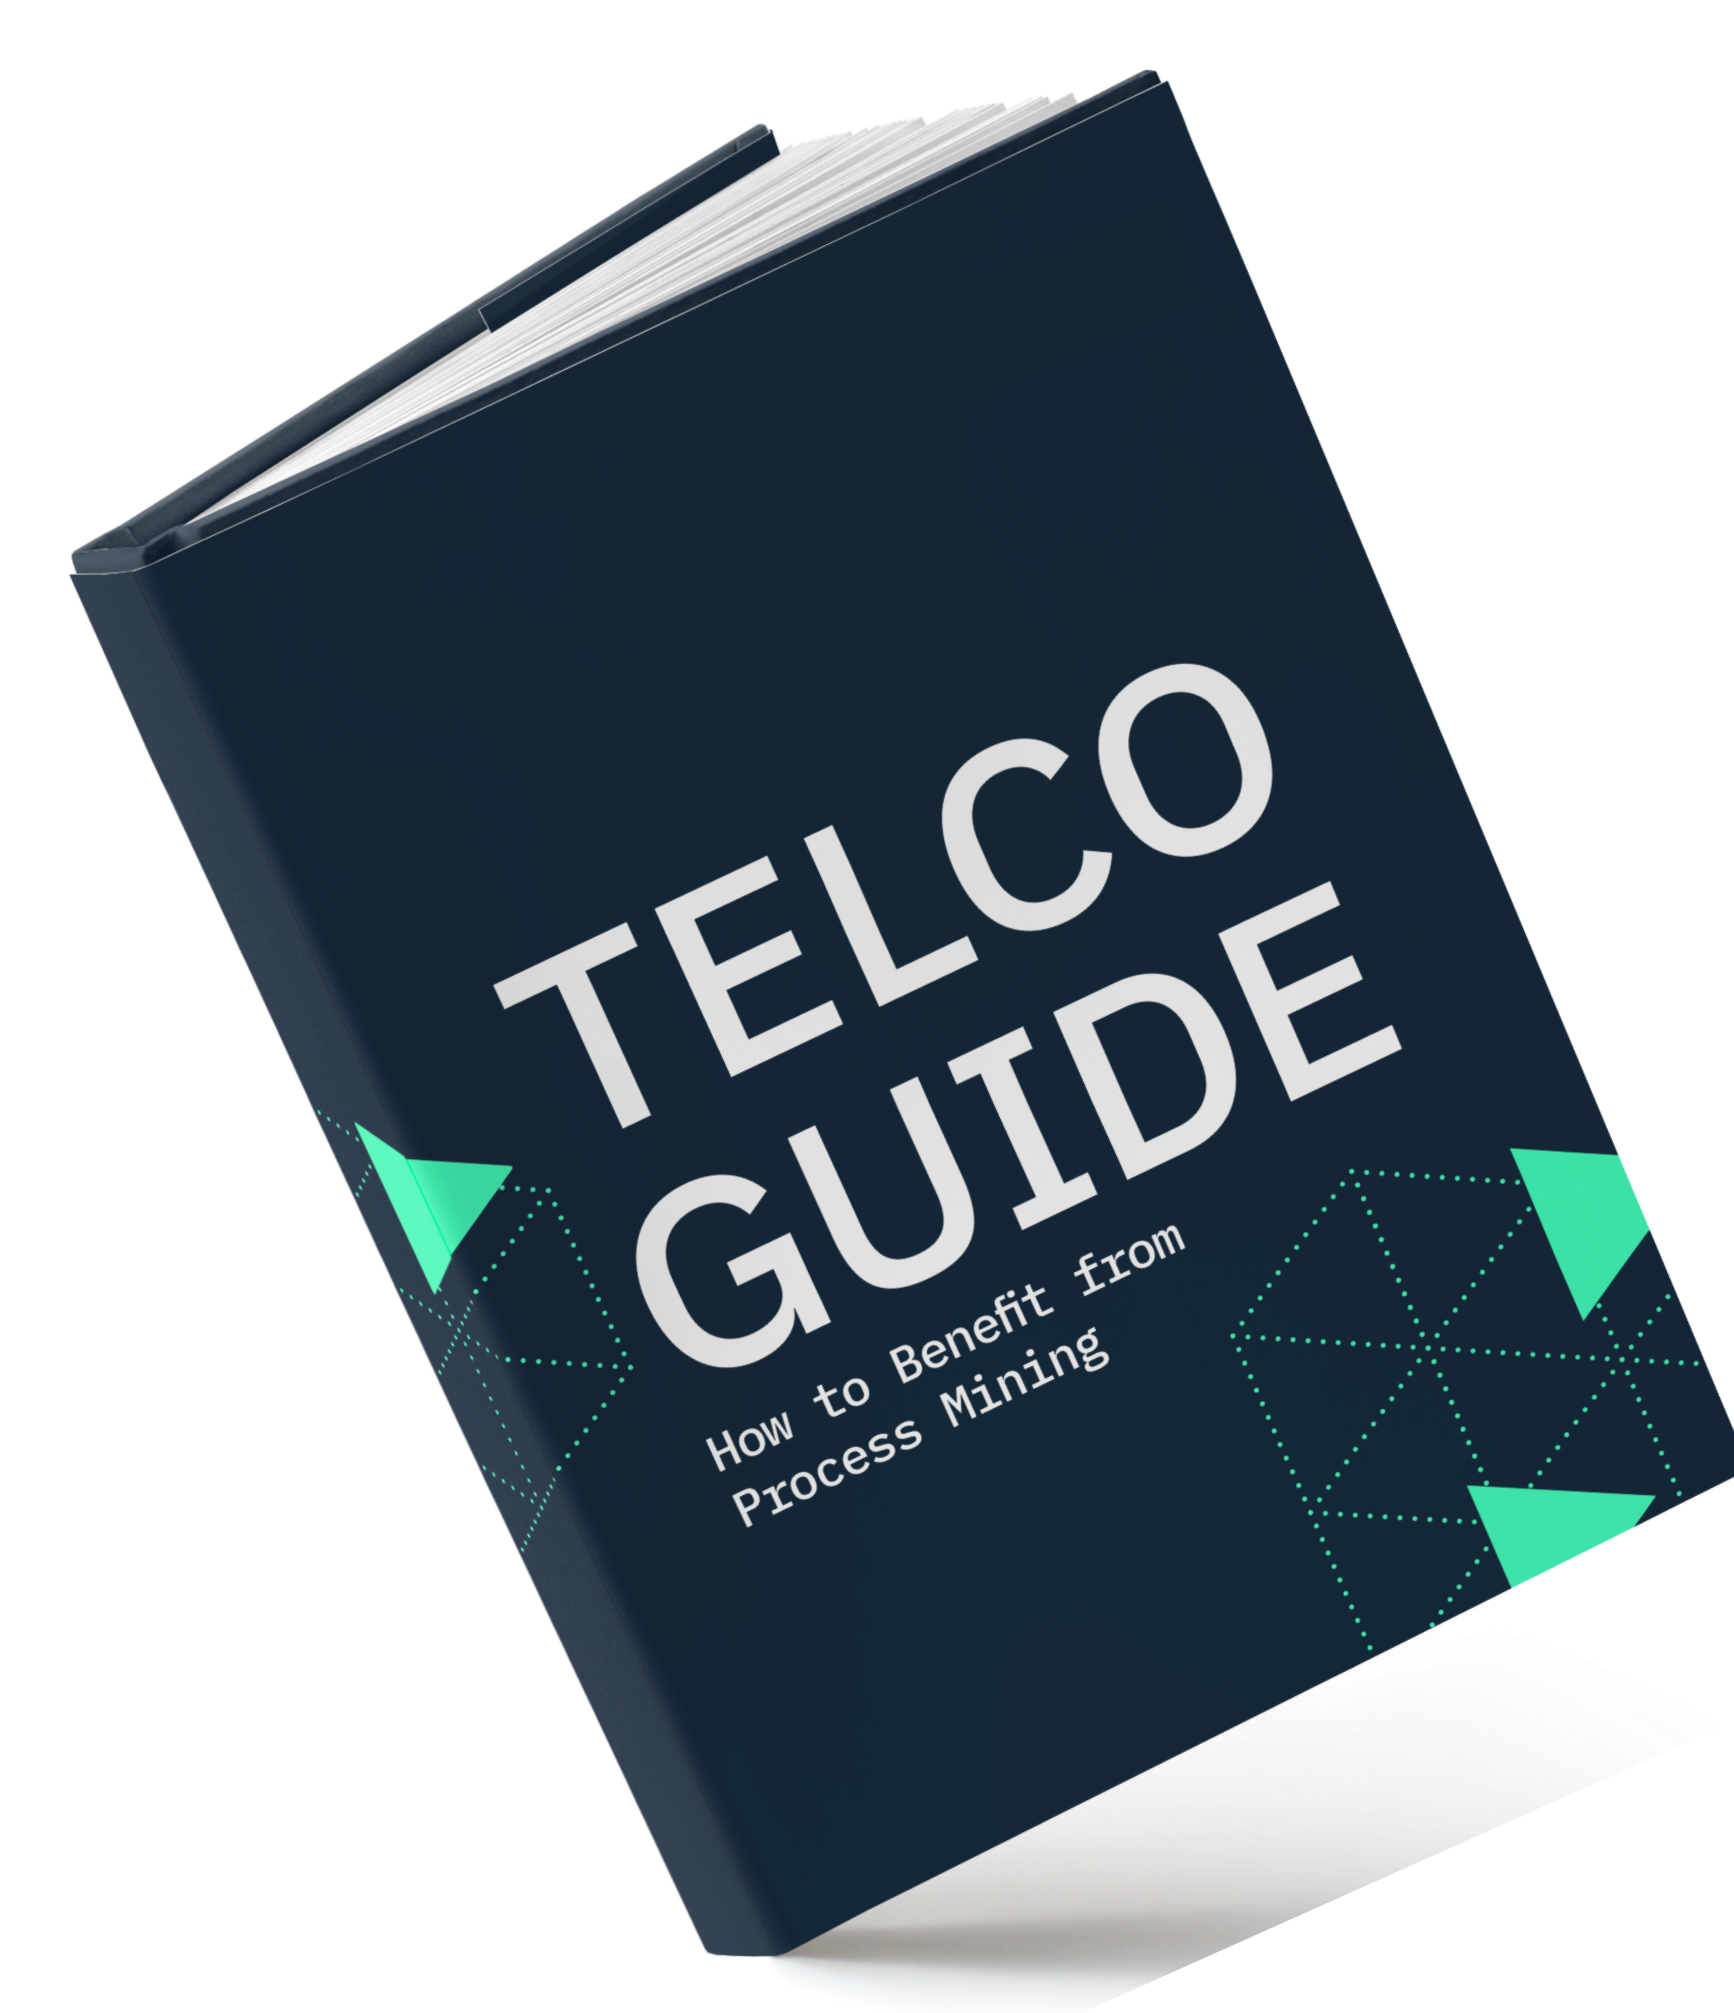 minit-free-telco-guide-how-to-benefit-from-process-mining@3x